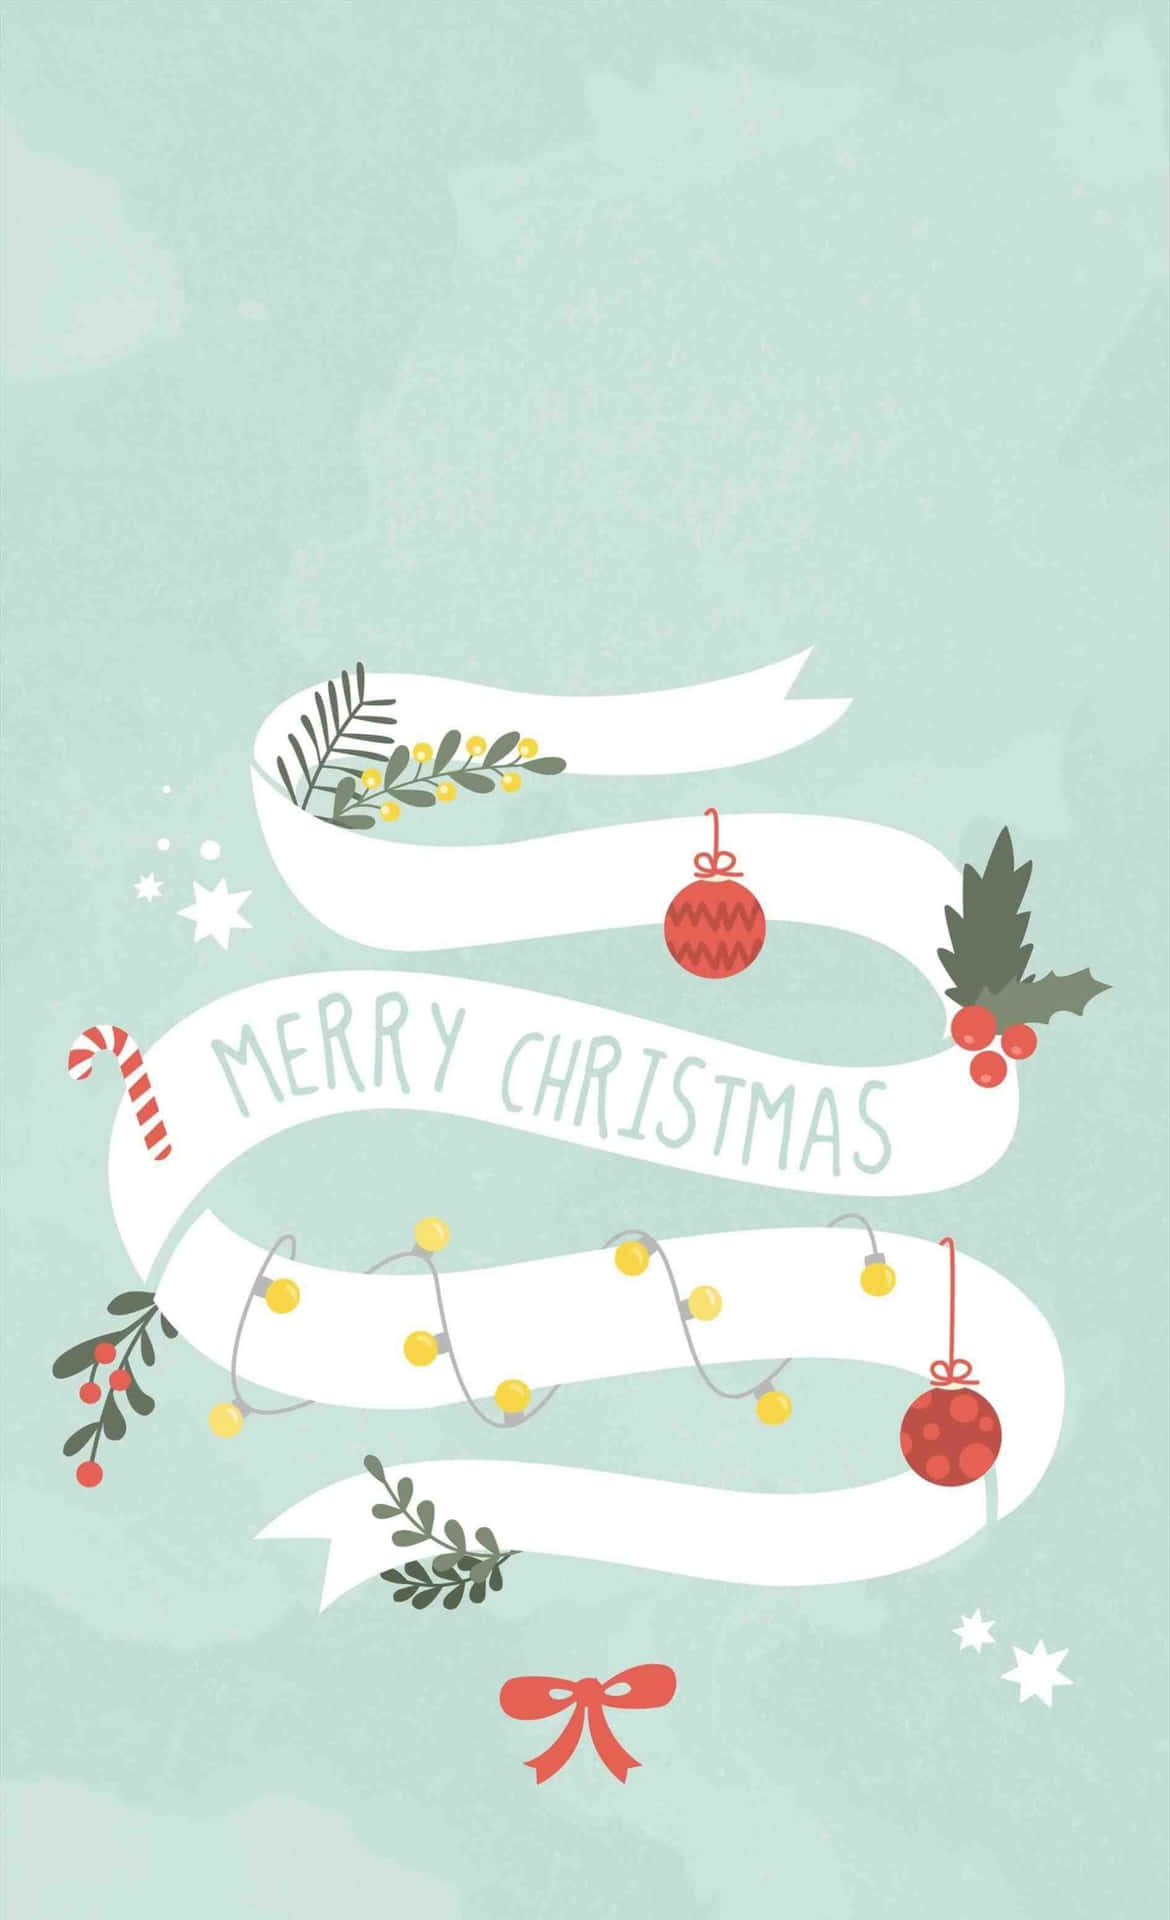 Let the Holiday Cheer Light Up Your Life with a Cute Christmas Phone! Wallpaper